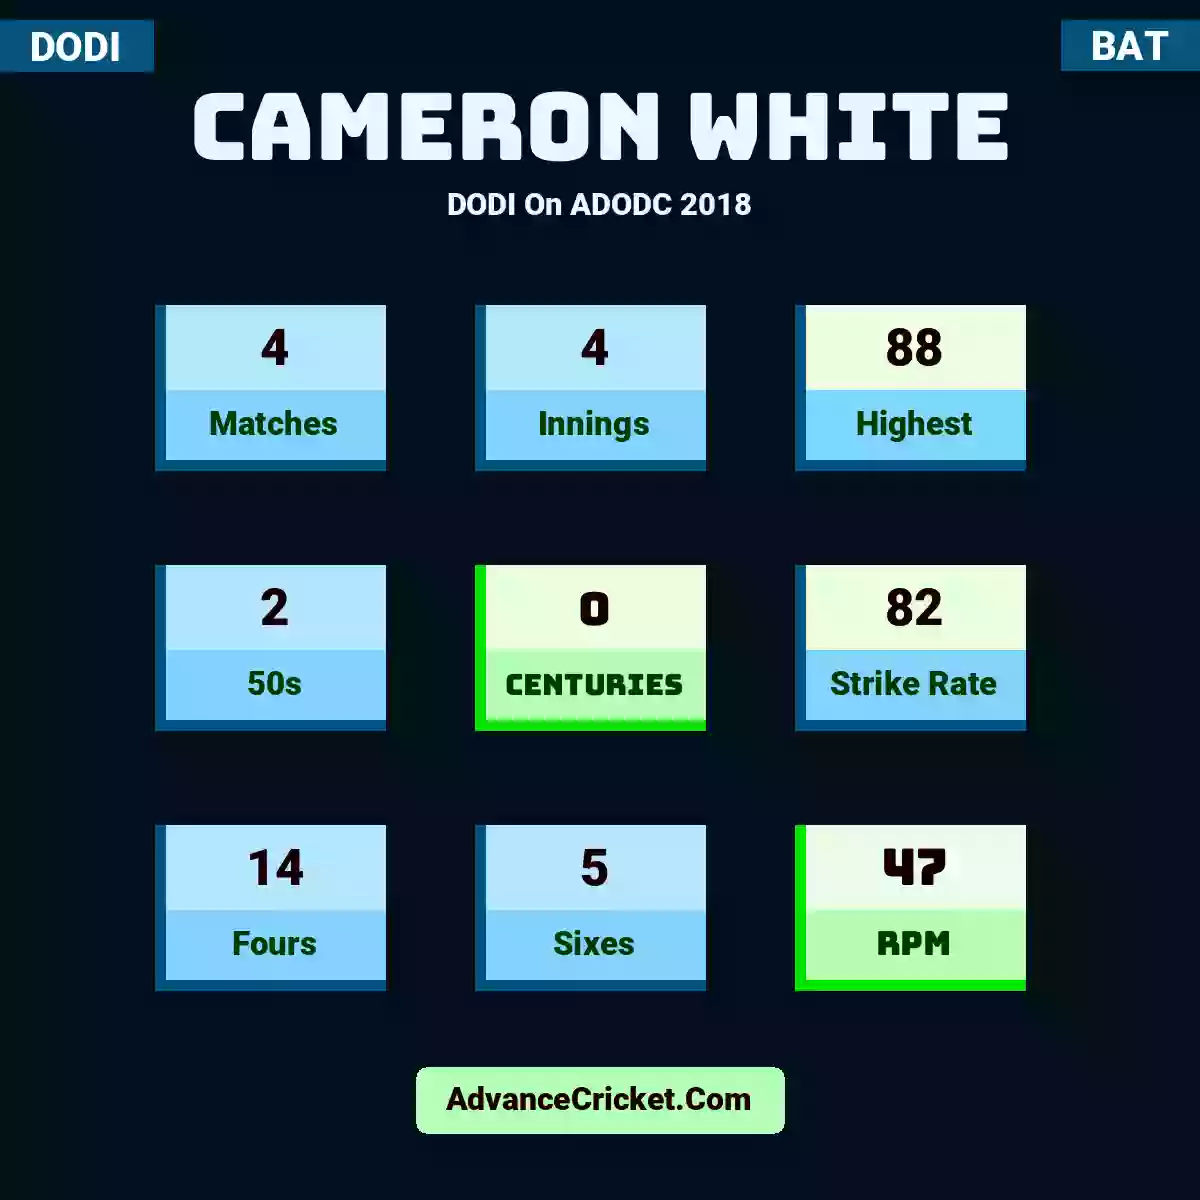 Cameron White DODI  On ADODC 2018, Cameron White played 4 matches, scored 88 runs as highest, 2 half-centuries, and 0 centuries, with a strike rate of 82. C.White hit 14 fours and 5 sixes, with an RPM of 47.